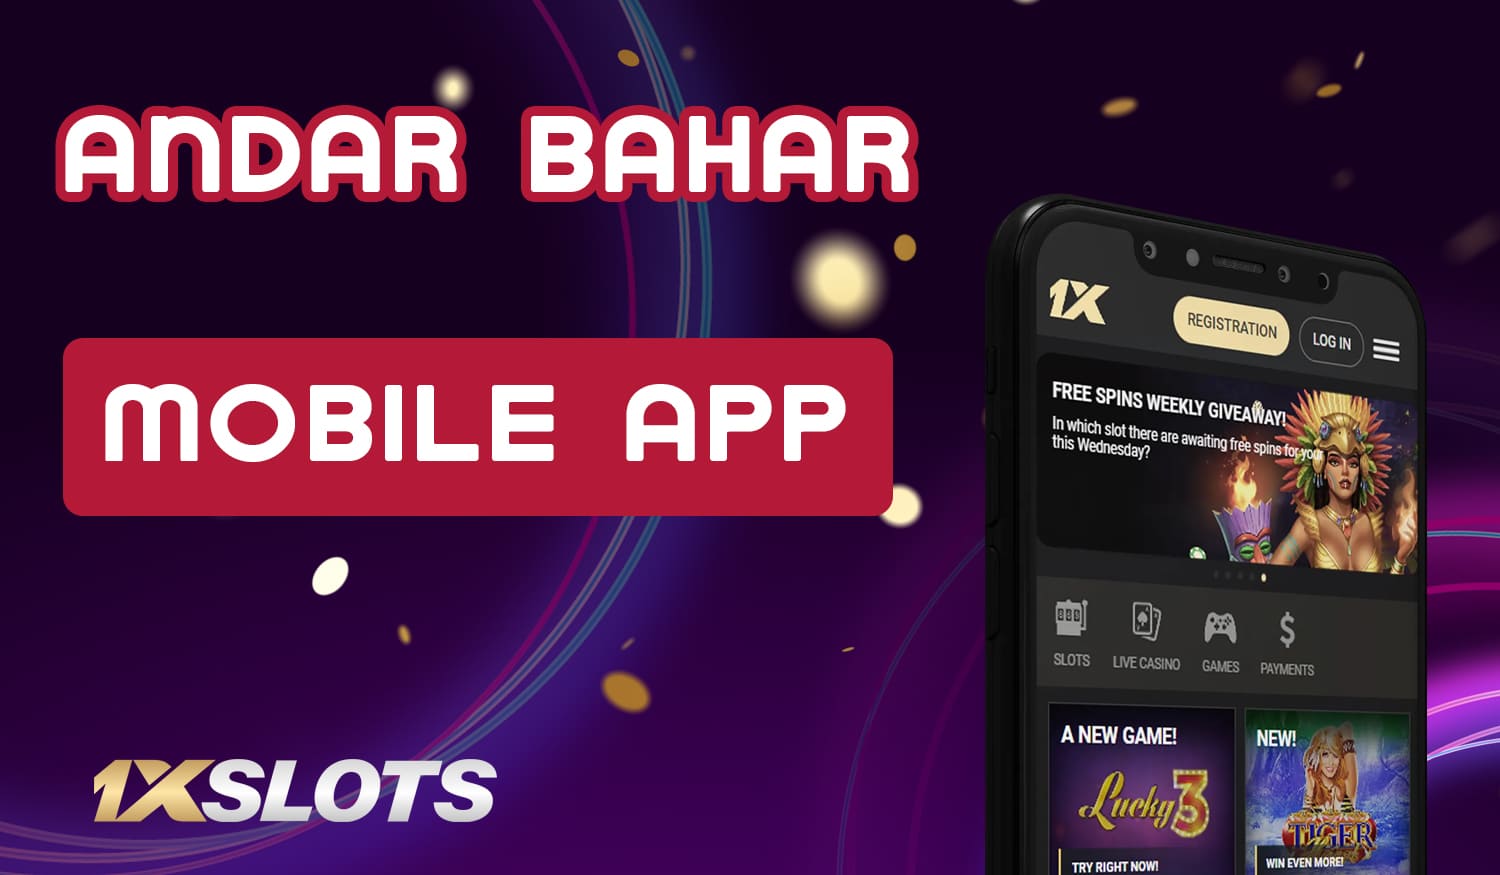 How 1Xslots users from India can download and install the mobile app